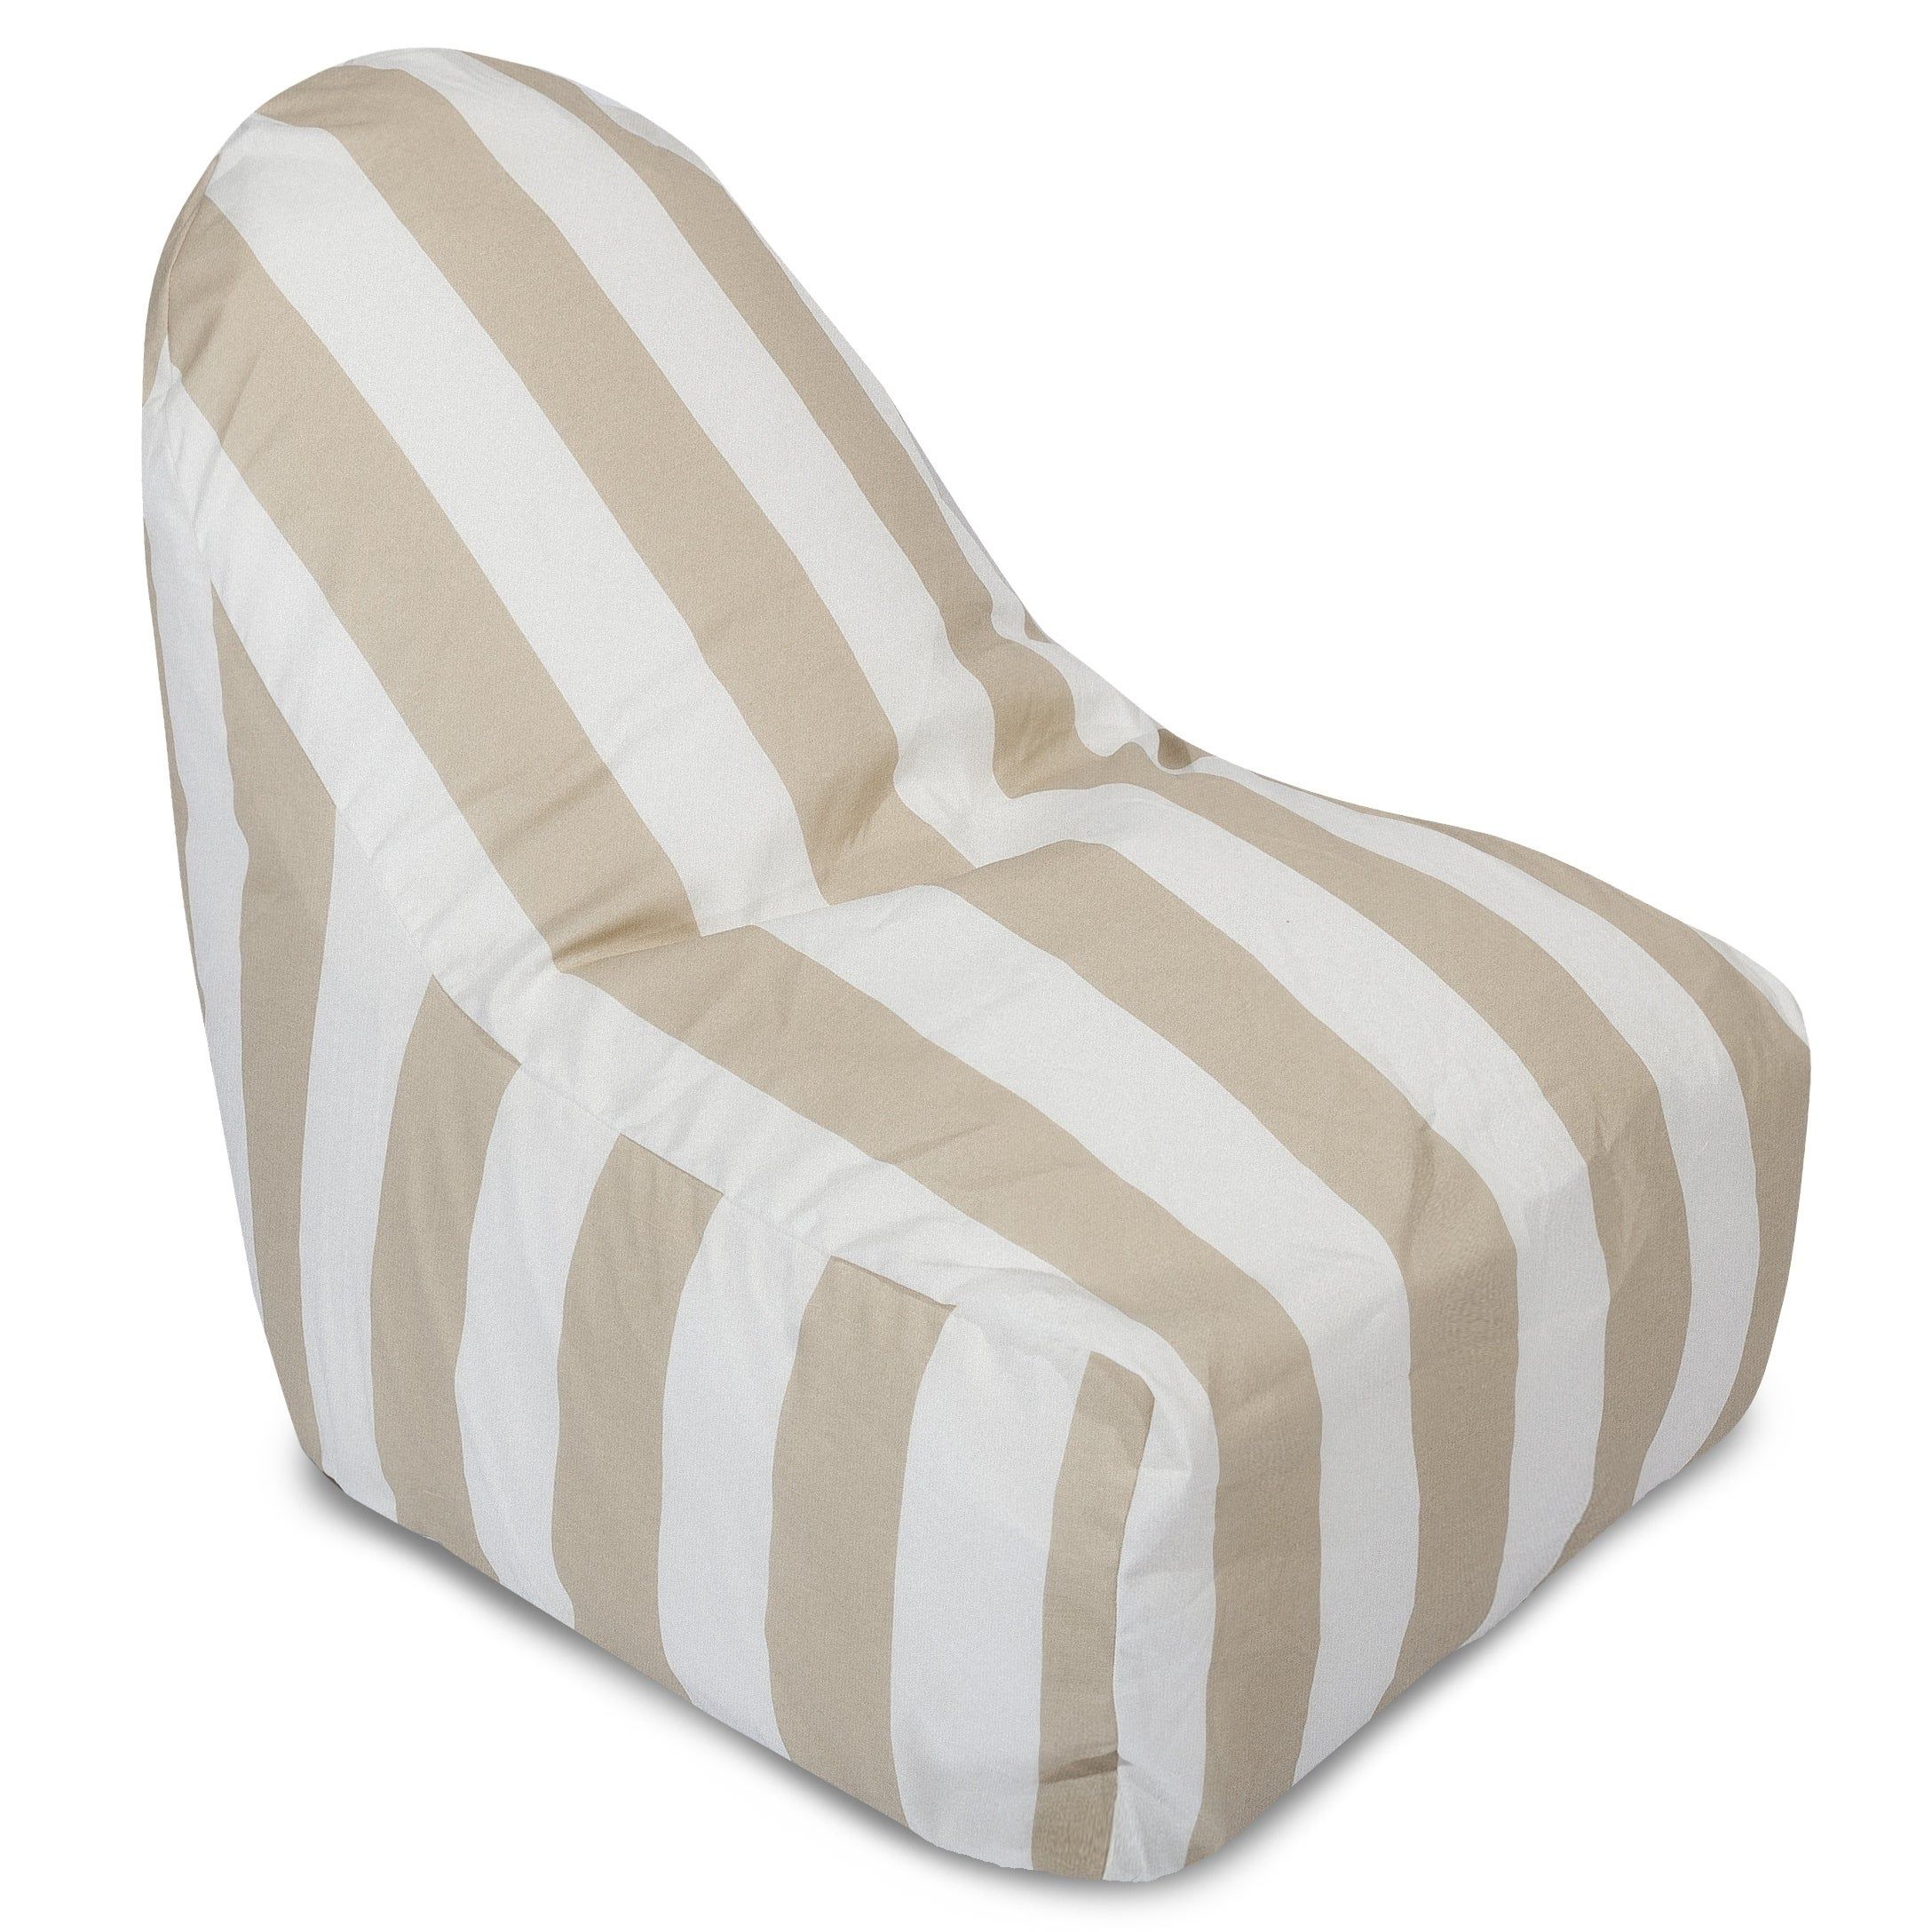 Indoor/outdoor Vertical Stripe Bean Bag Chair Loungers Throughout Current Majestic Home Goods Indoor Outdoor Vertical Stripe Bean Bag Kick It Chair  30 In L X 26 In W X 30 In H (View 13 of 25)